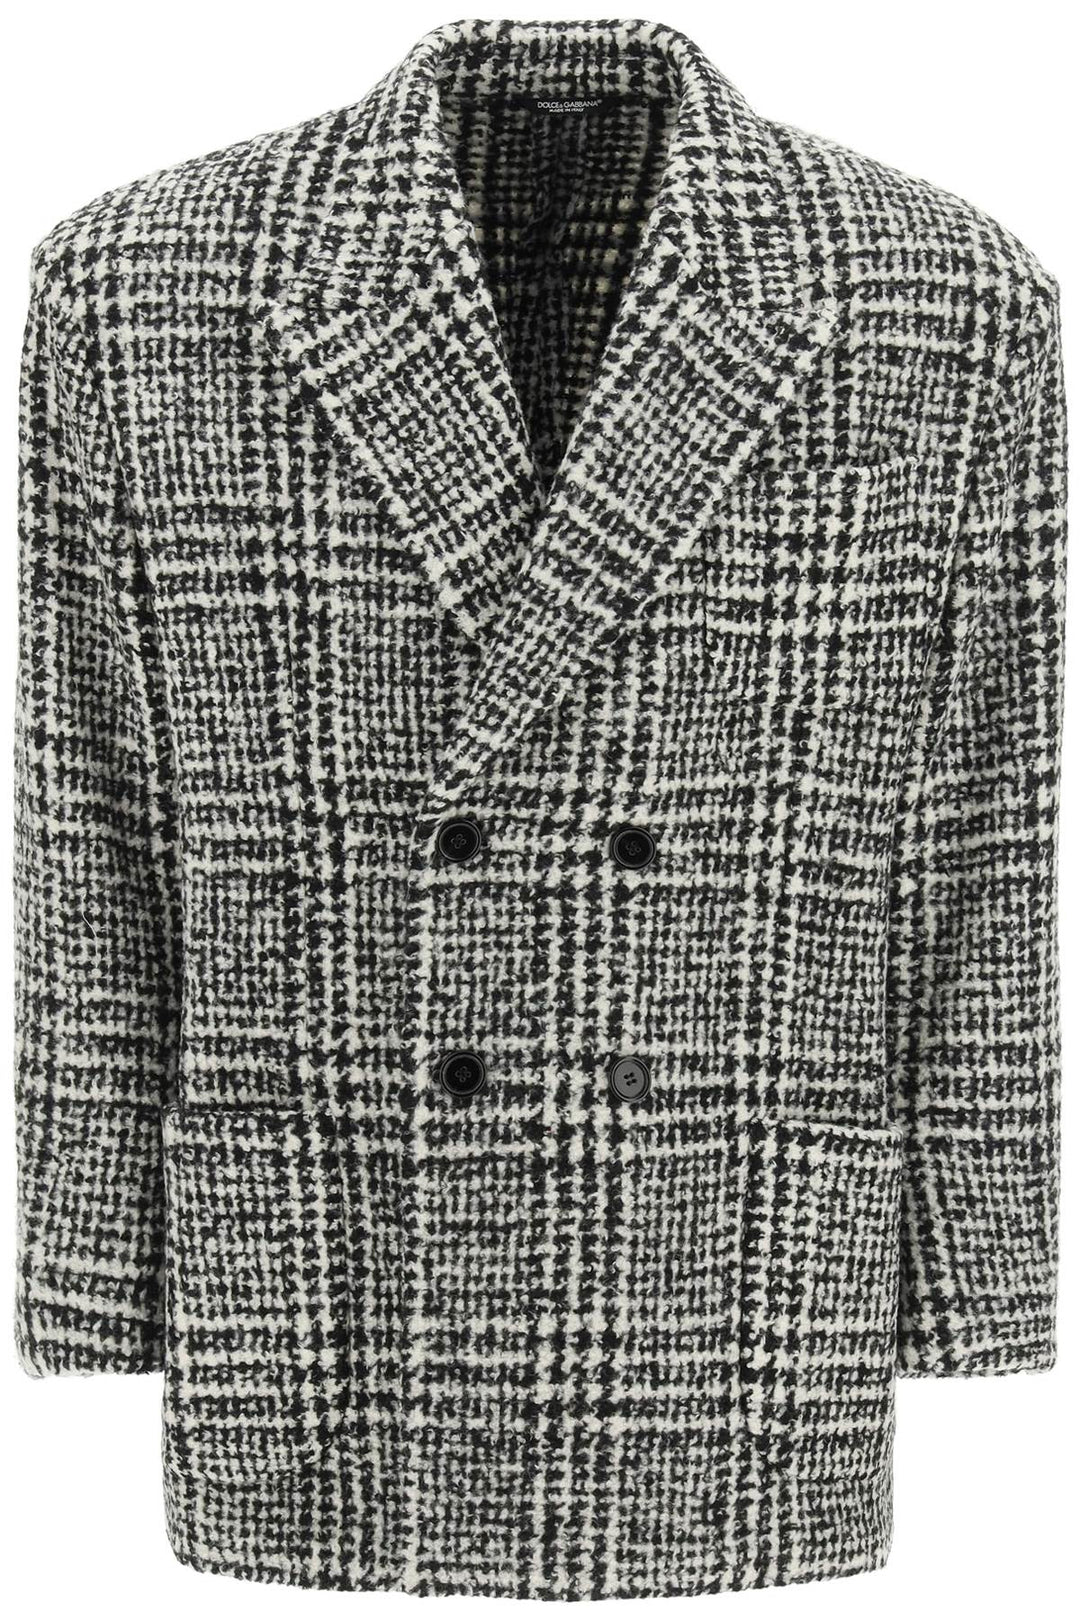 Dolce & Gabbana Checkered Double Breasted Wool Jacket   Nero